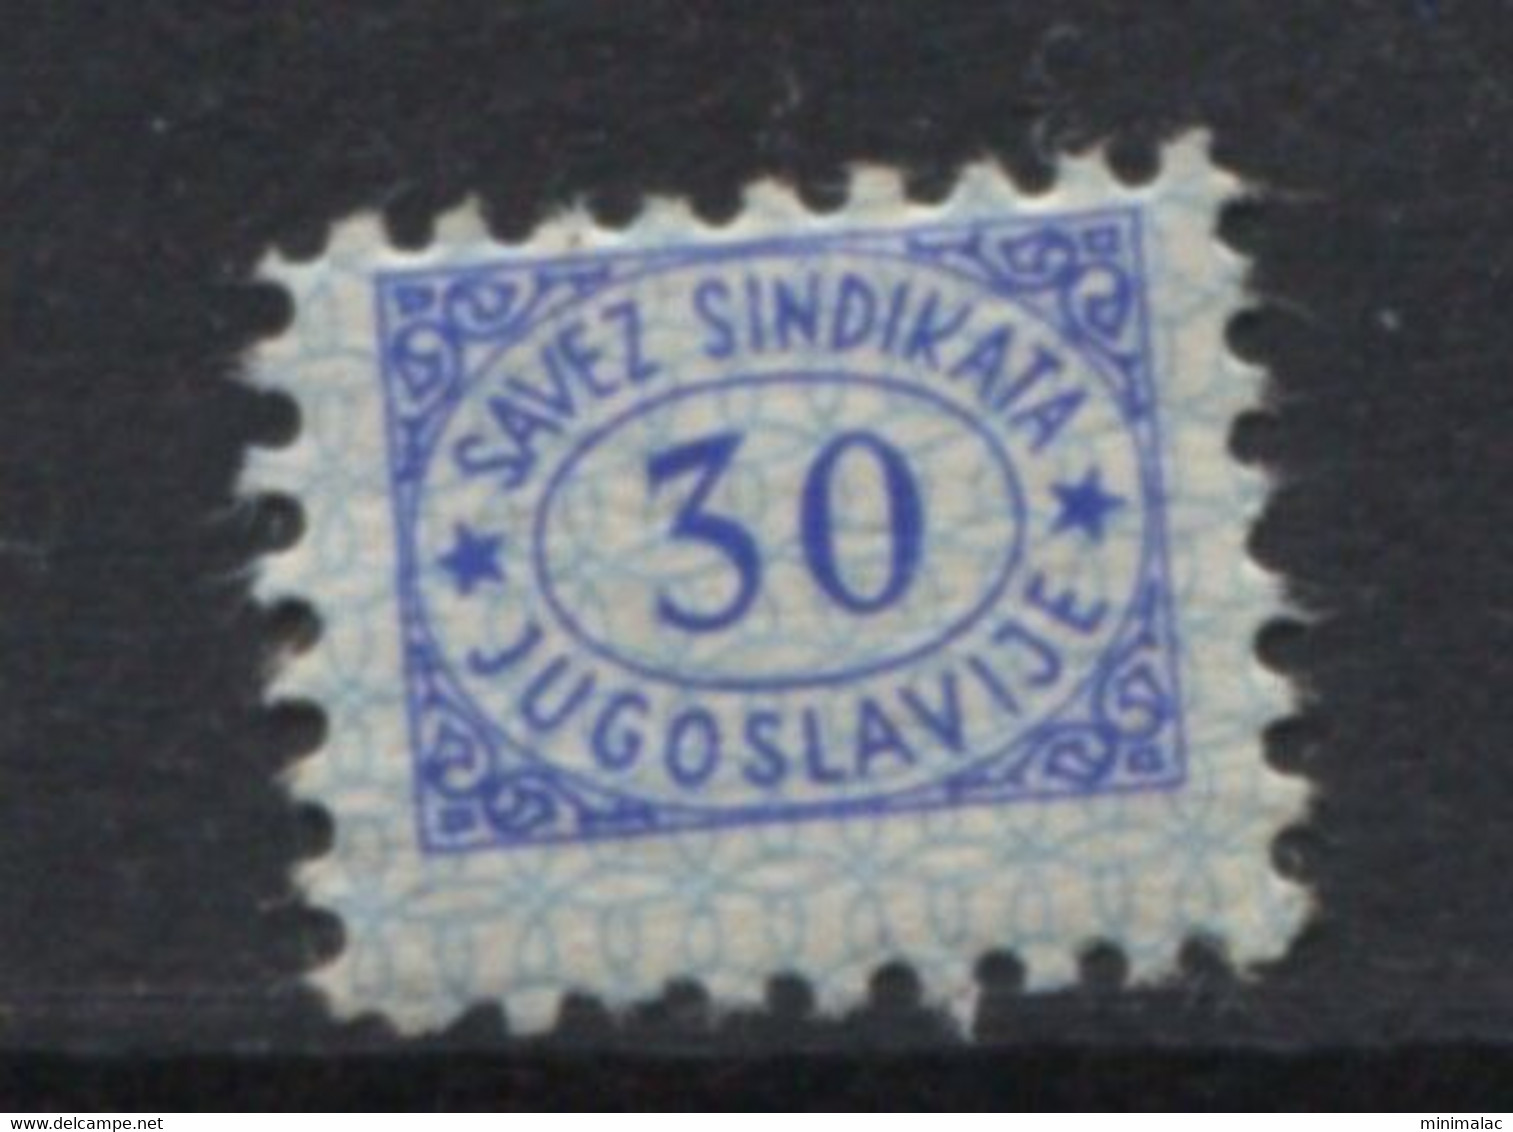 Yugoslavia 1956, Stamp For Membership, Labor Union, Administrative Stamp - Revenue, Tax Stamp, 30d, MNH - Officials